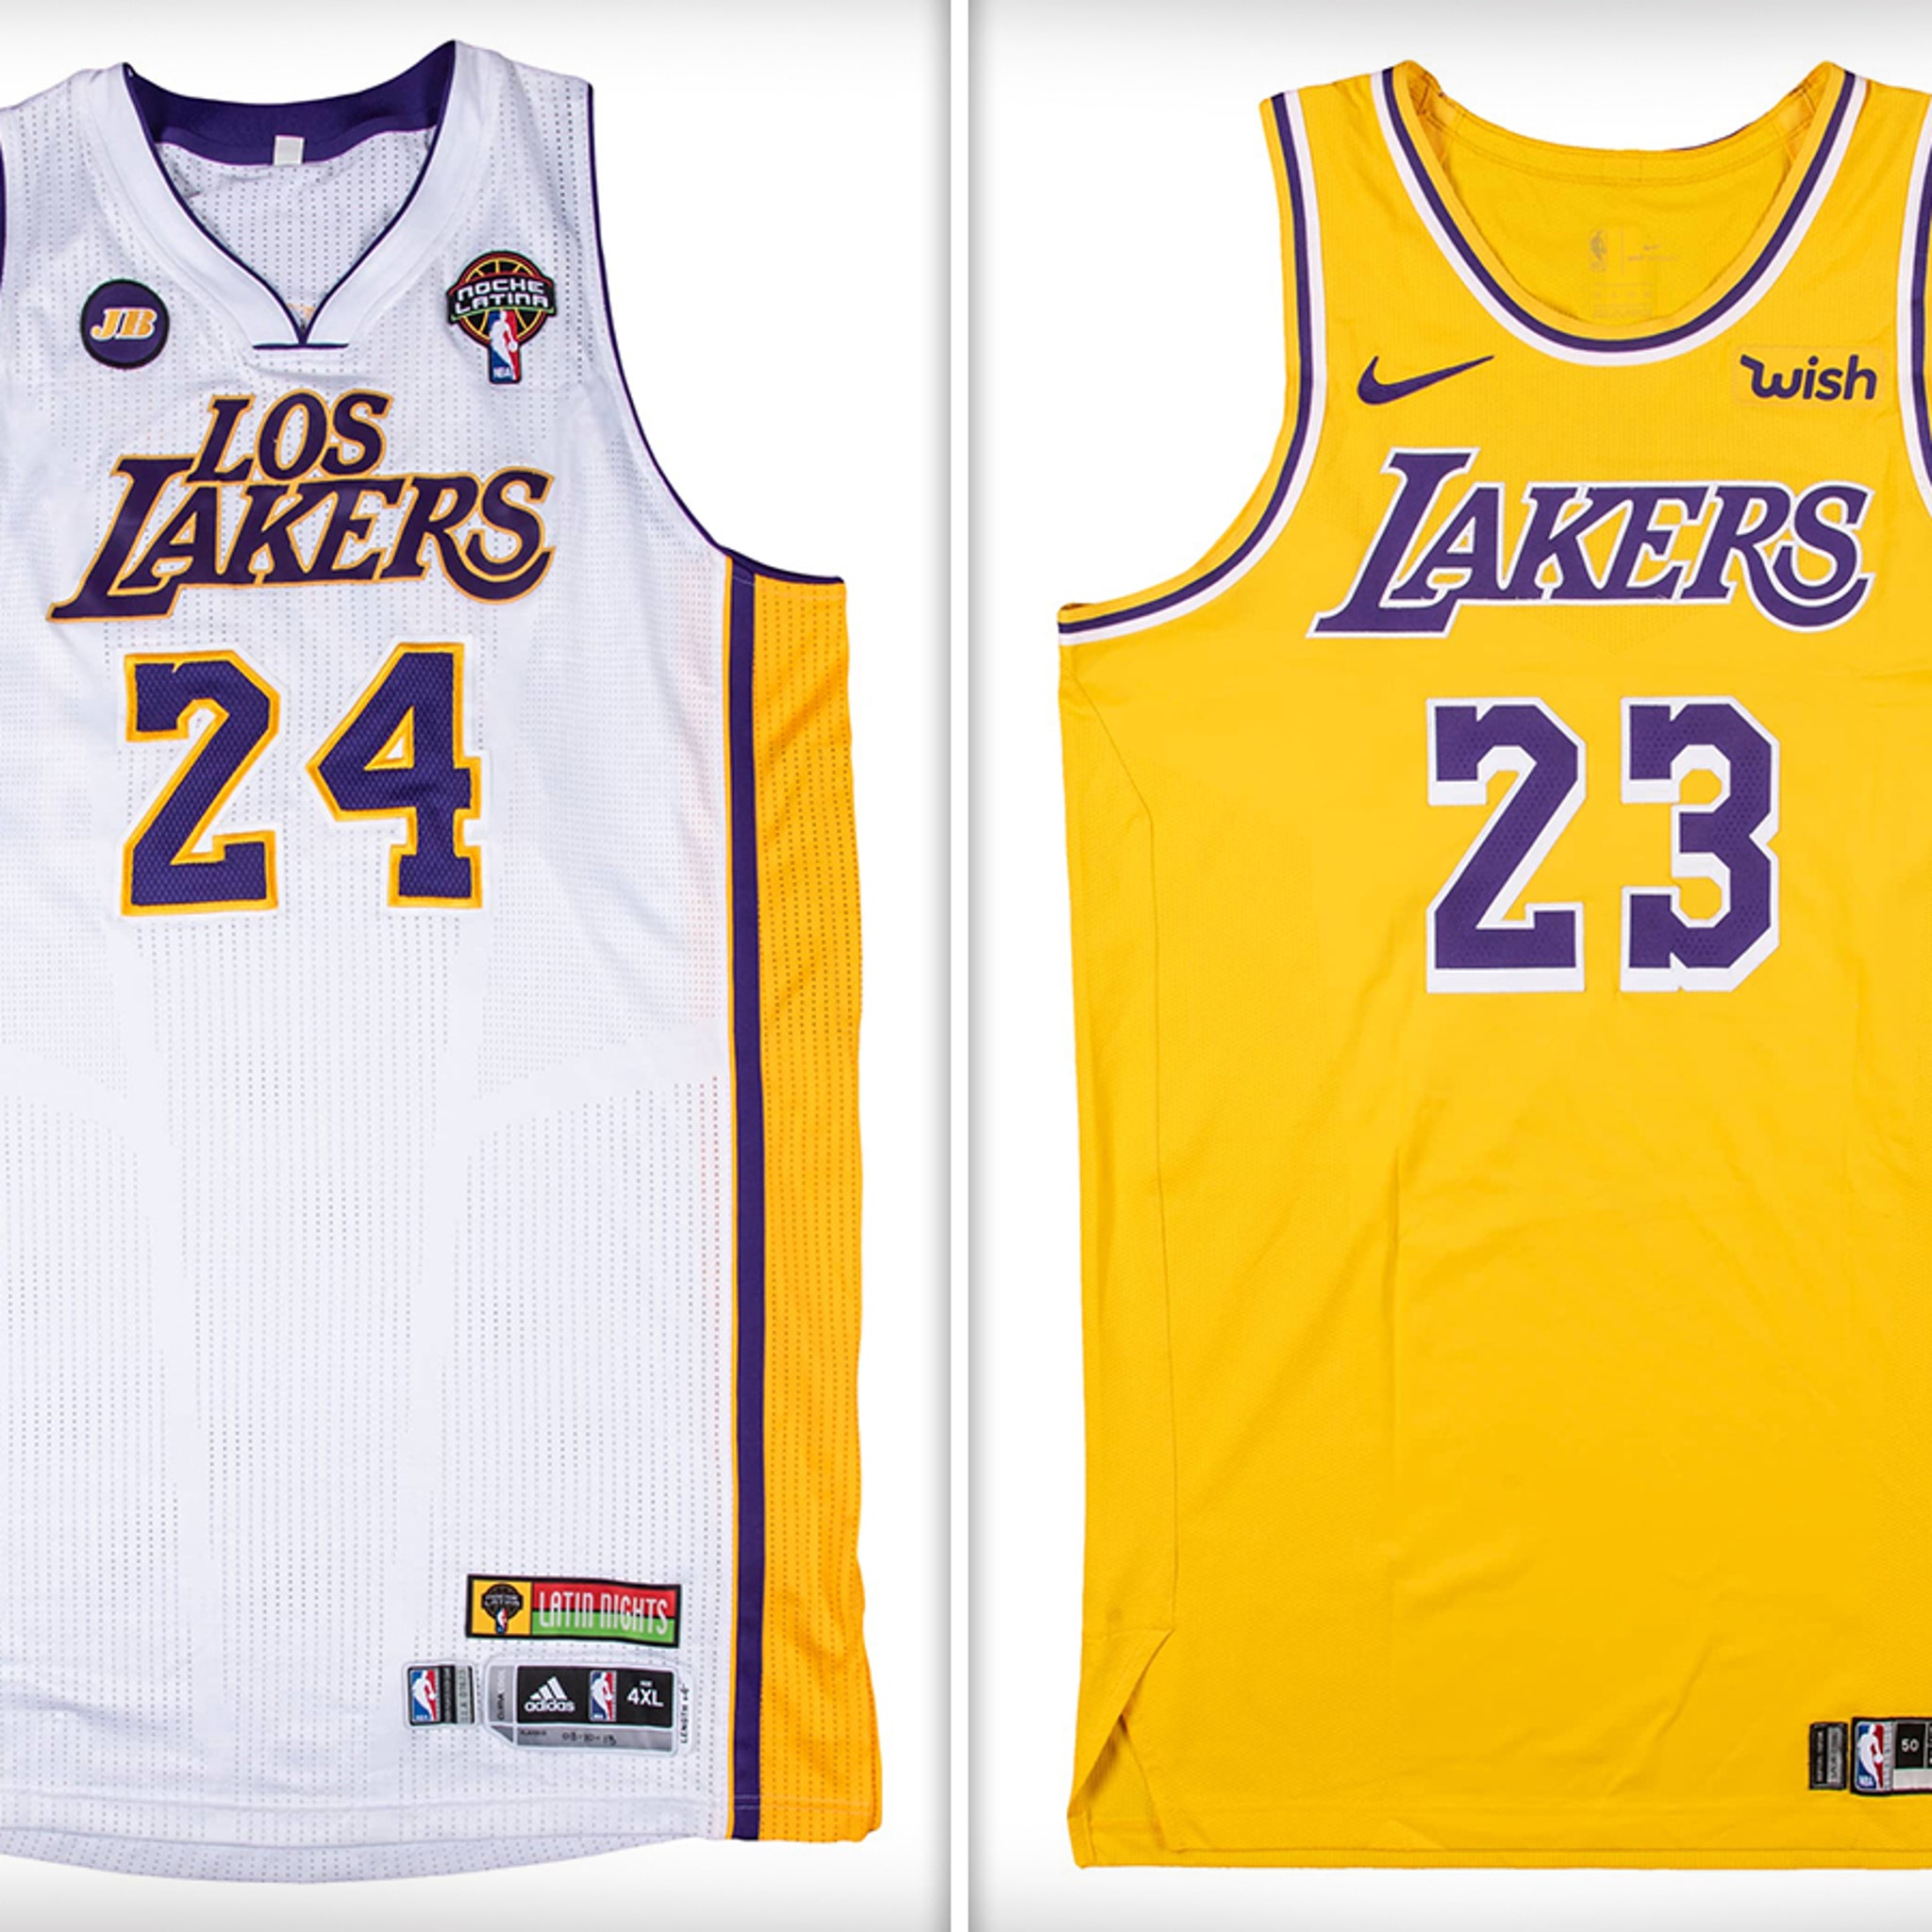 Rare Kobe & LeBron Lakers Jerseys Hit Auction, Could Fetch Over